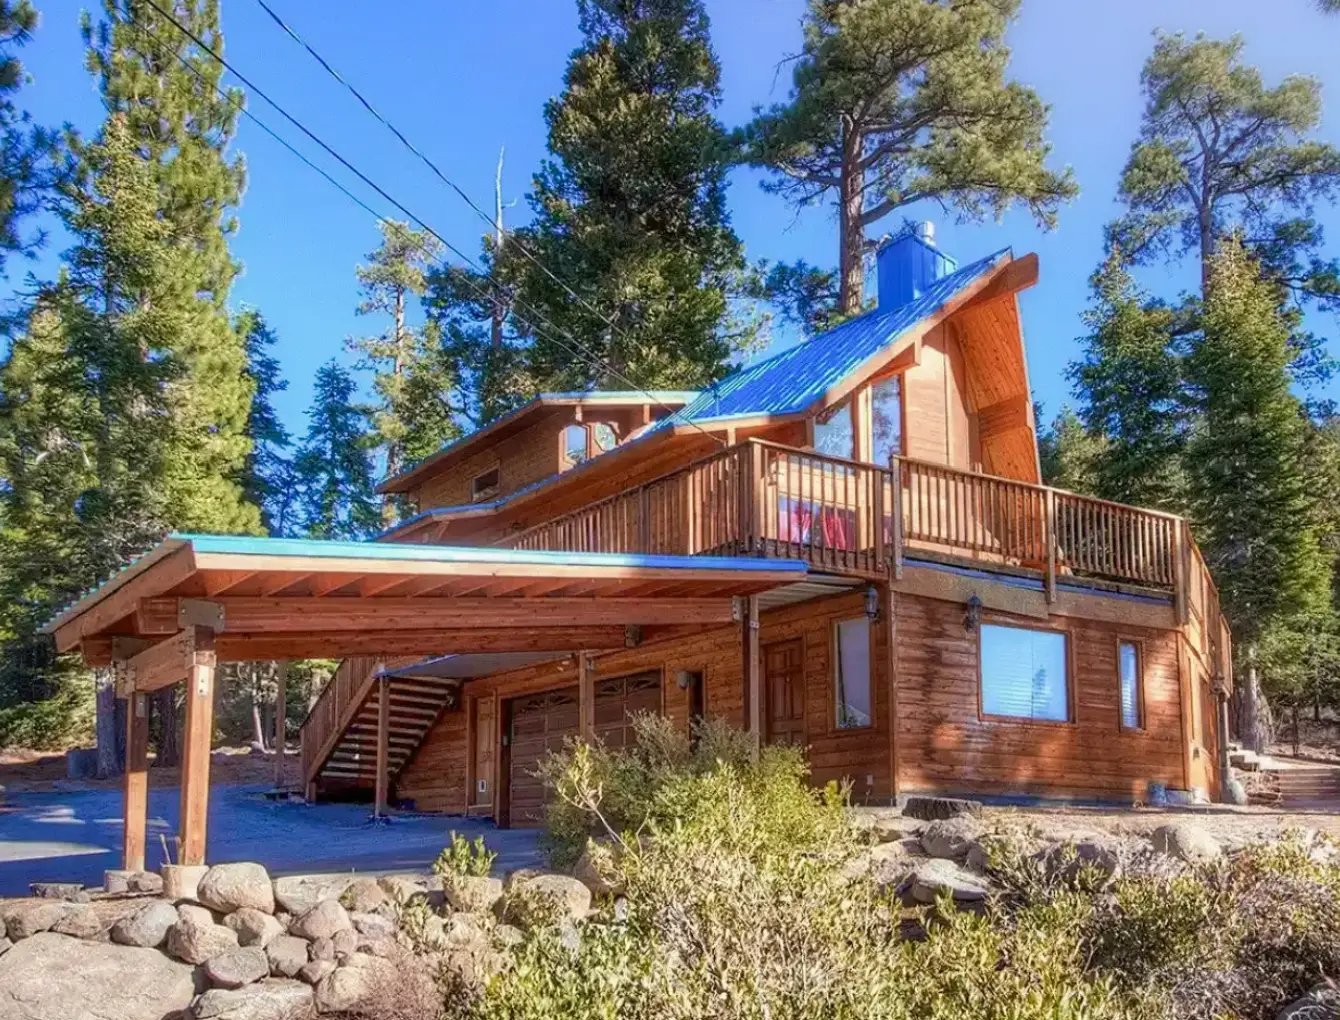 Vacation cabin rental with log cabin structure and large deck along with a-frame roof